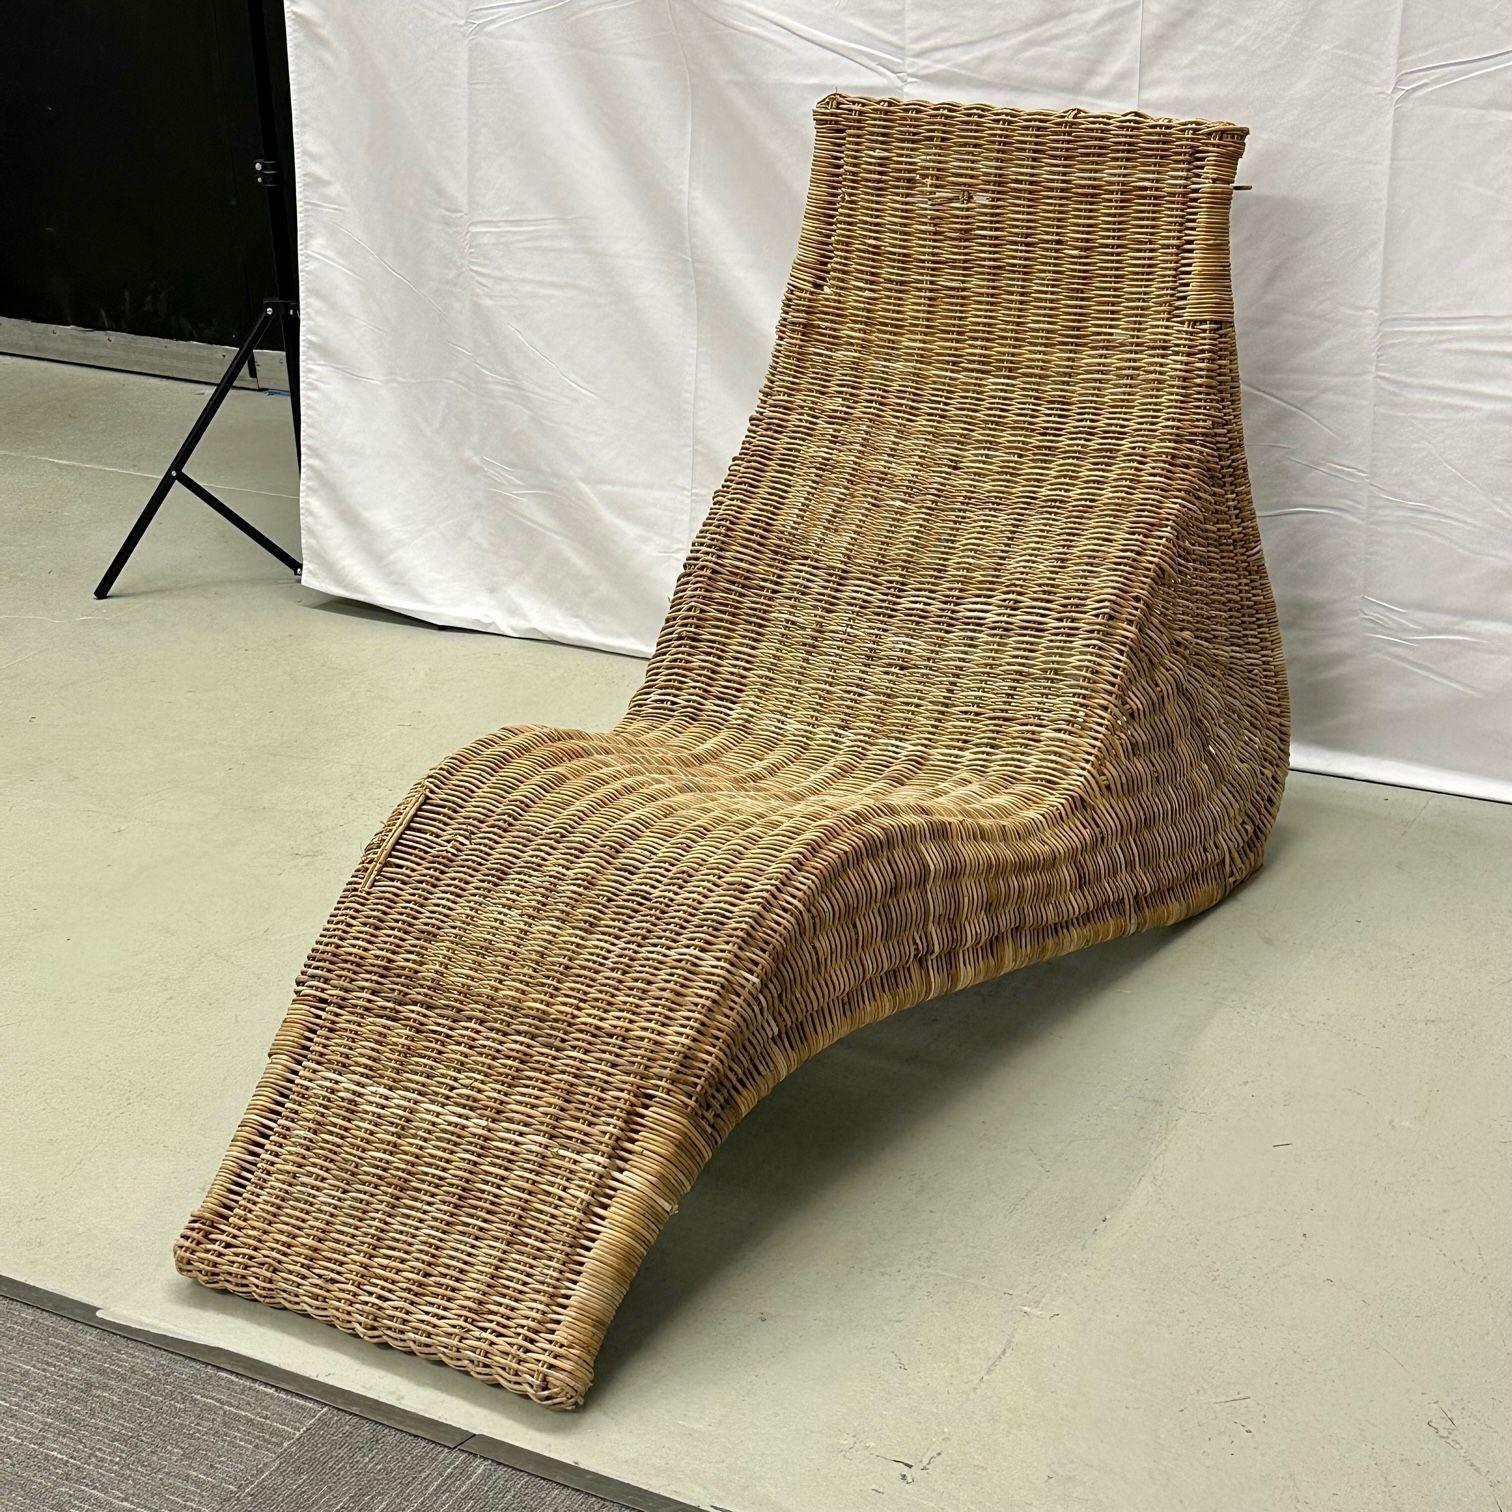 Pair Bohemian Mid-Century Modern Karlskrona Rattan Wicker Chaise Lounge Chairs For Sale 3